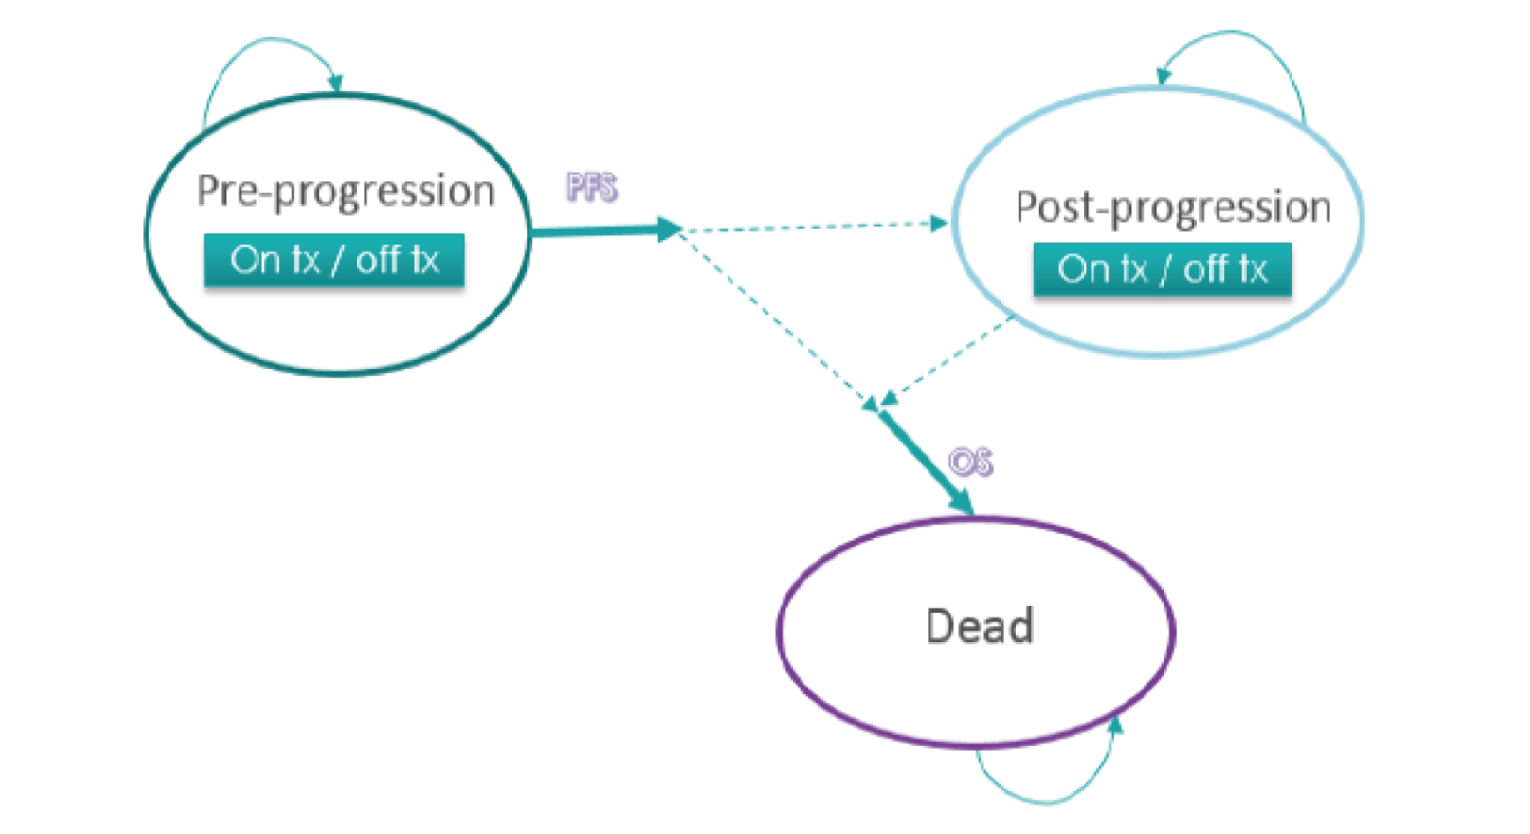 A 3-state model diagram with states “pre-progression (on treatment/off treatment)”, “post-progression (on treatment/off treatment),” and dead. Arrows connect the states to one another, and curved arrows describe transitions back into the same state.